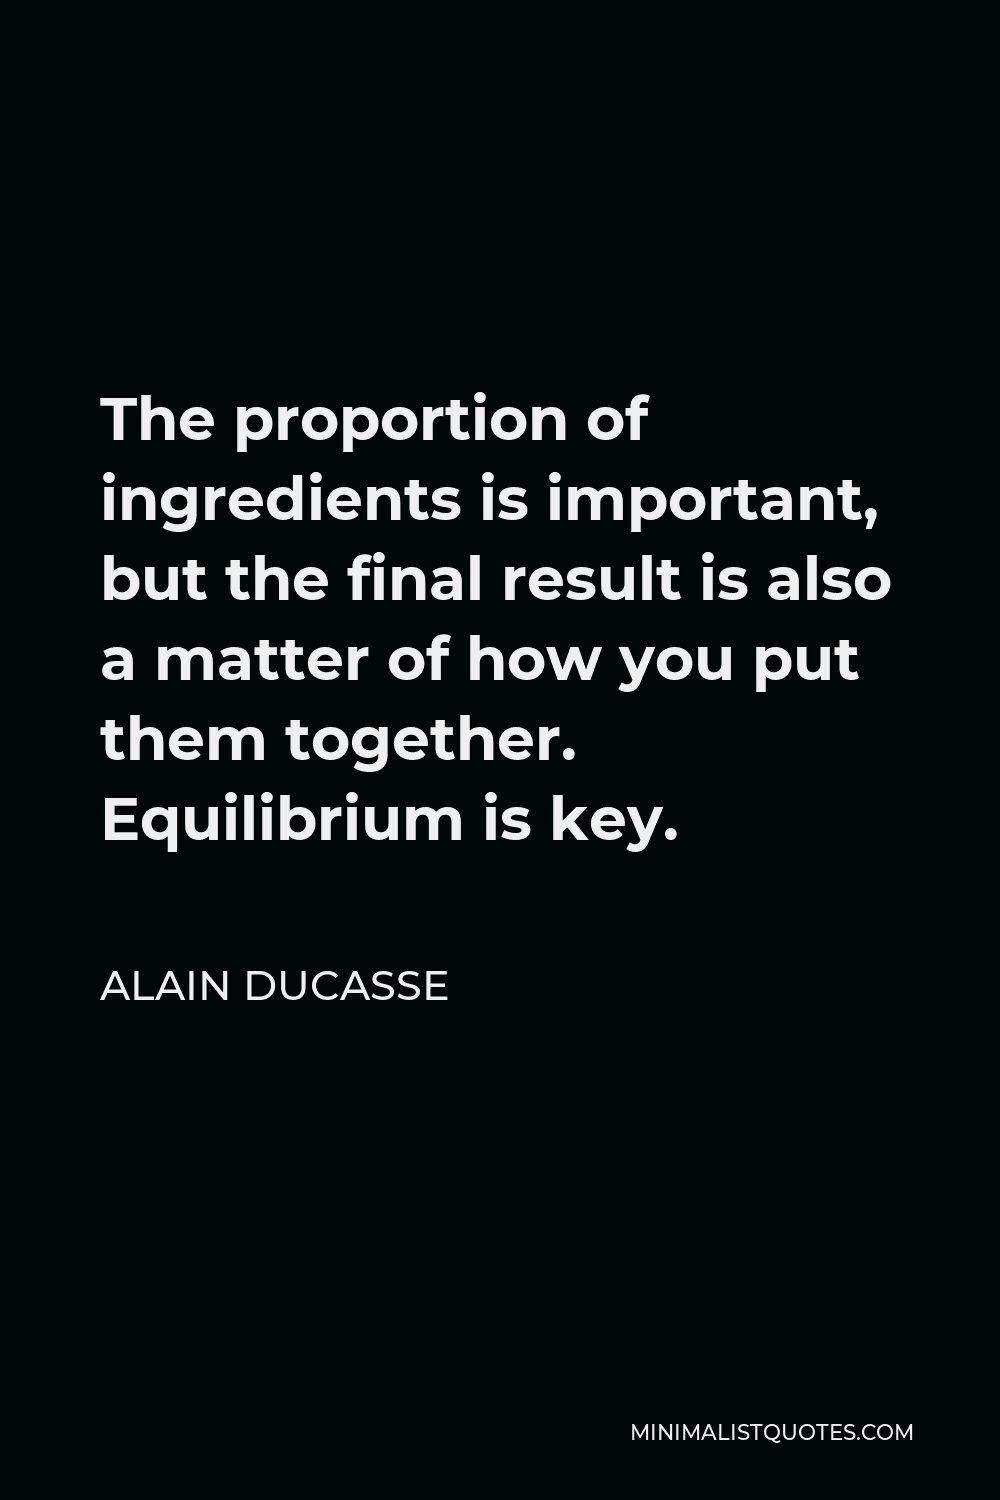 Alain Ducasse Quote - The proportion of ingredients is important, but the final result is also a matter of how you put them together. Equilibrium is key.